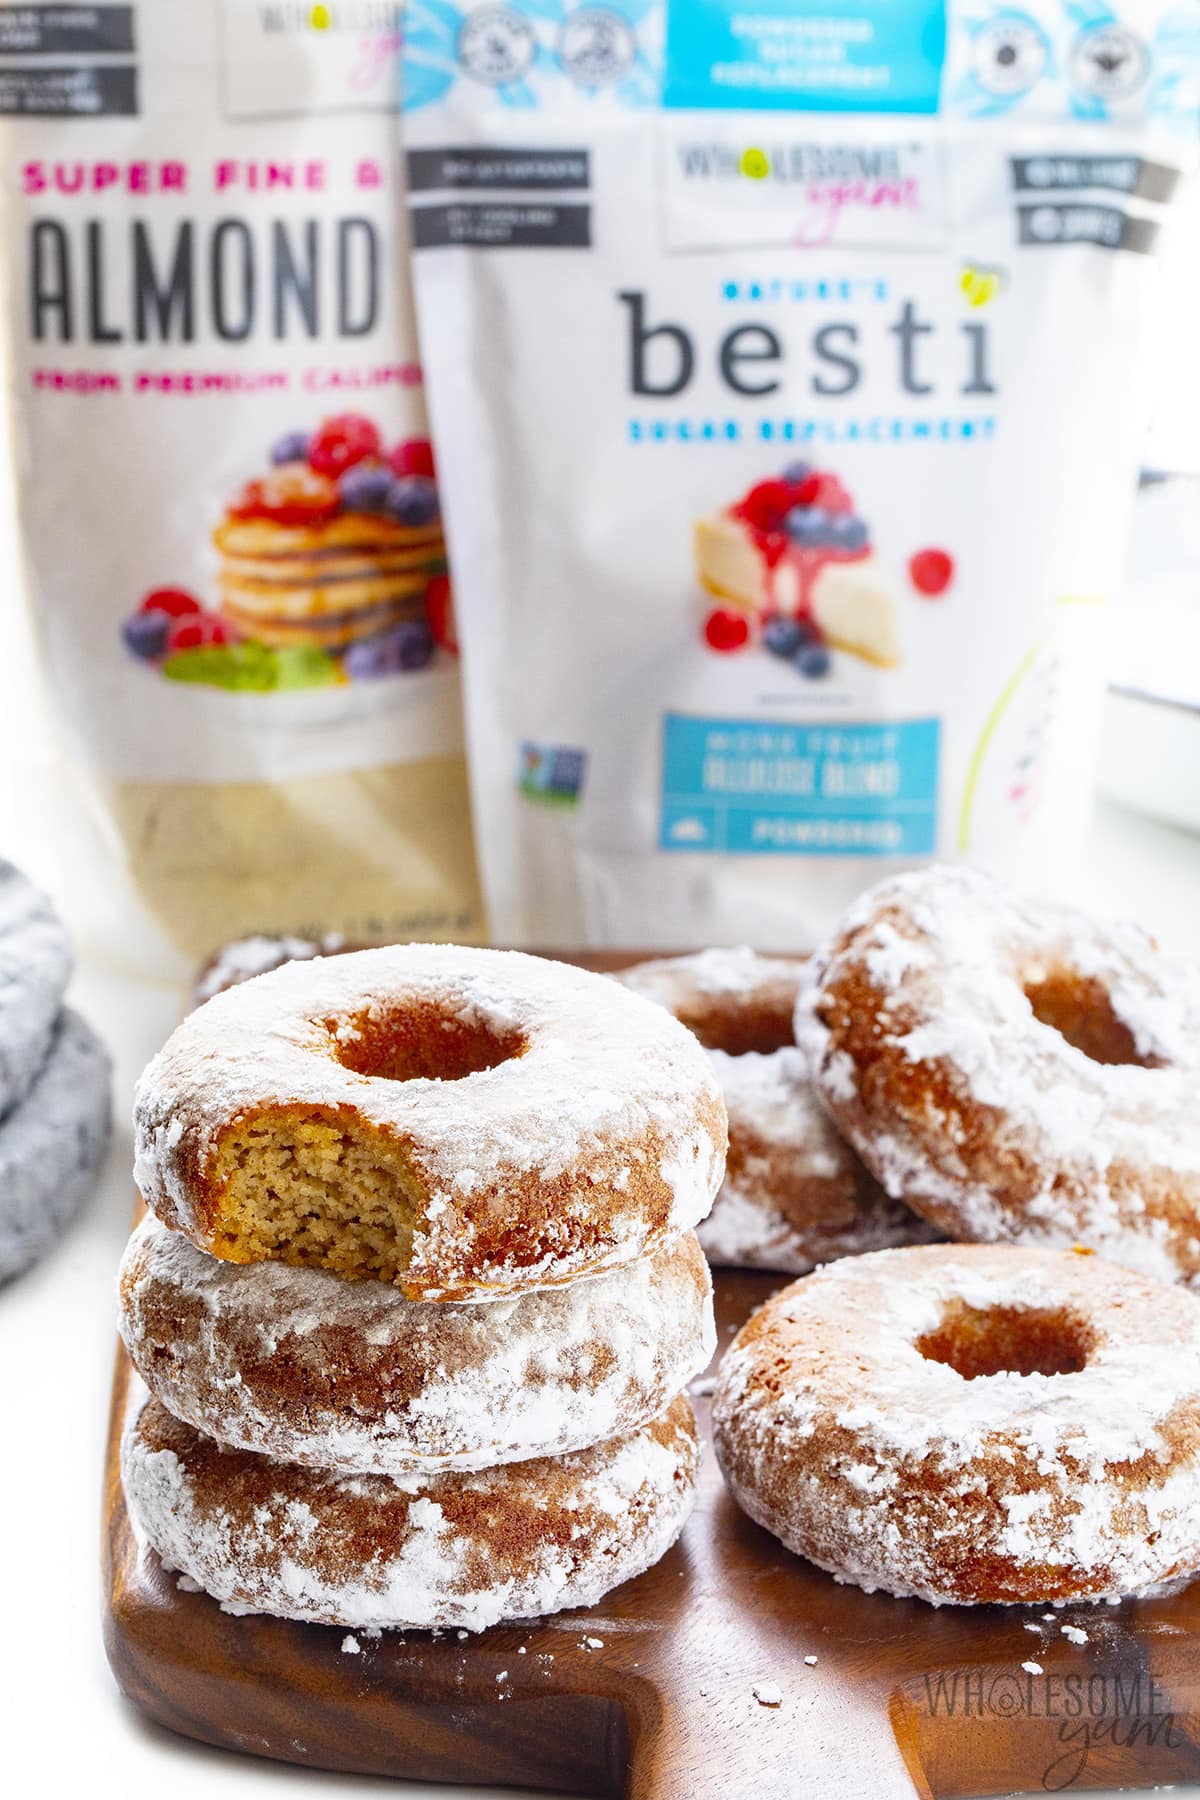 Keto donuts with almond flour and Besti.